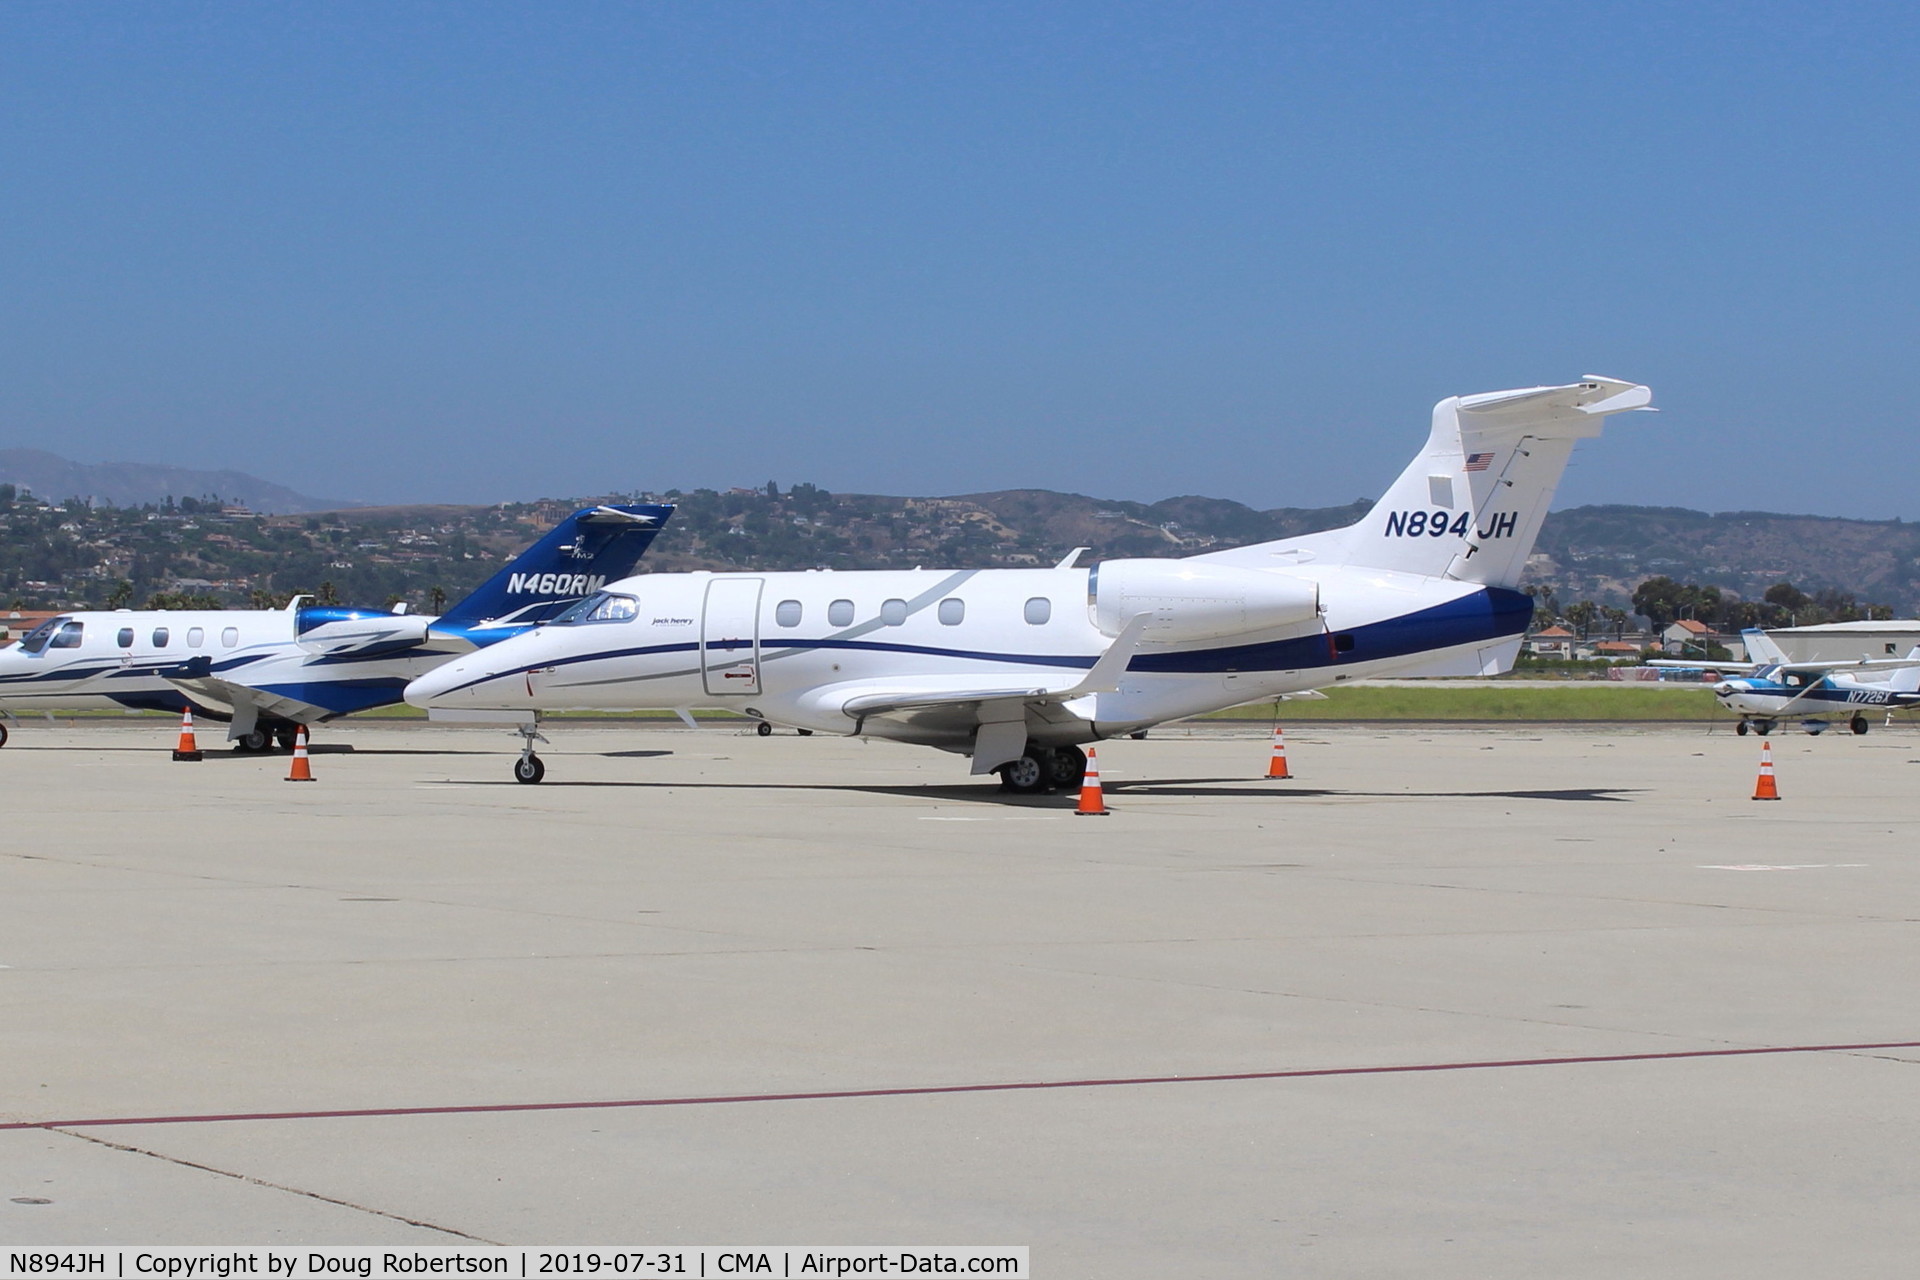 N894JH, 2013 ENBRAER EXECUTIVE AIRCRAFT INC. EMB-505 C/N 50500138, 2013 EMBRAER EXECUTIVE AIRCRAFT INC. EMB-505 mid-sized jet, two P&W CANADA PW535E Turbofans with FADEC, rated 3,200 lbst each, cabin pressurized, on Transient Ramp